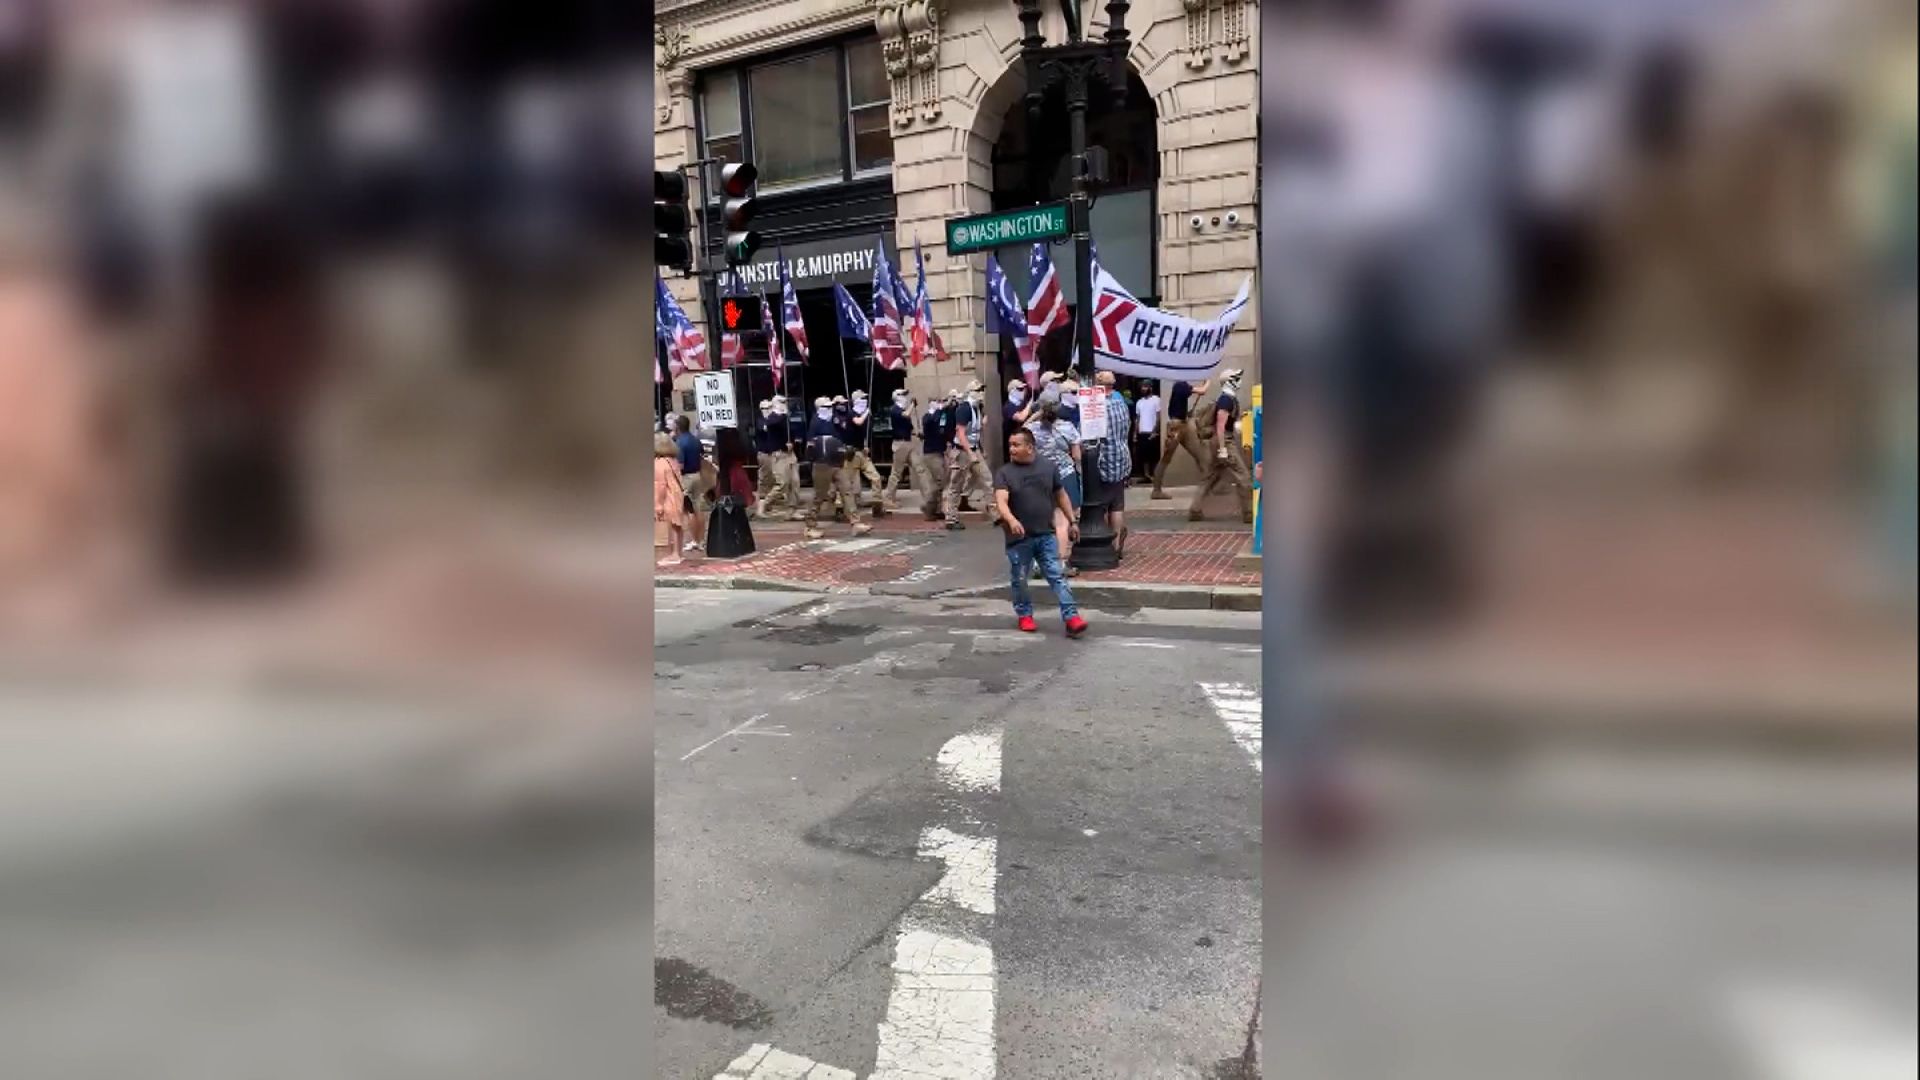 Group wielding White nationalist flags march along Boston's